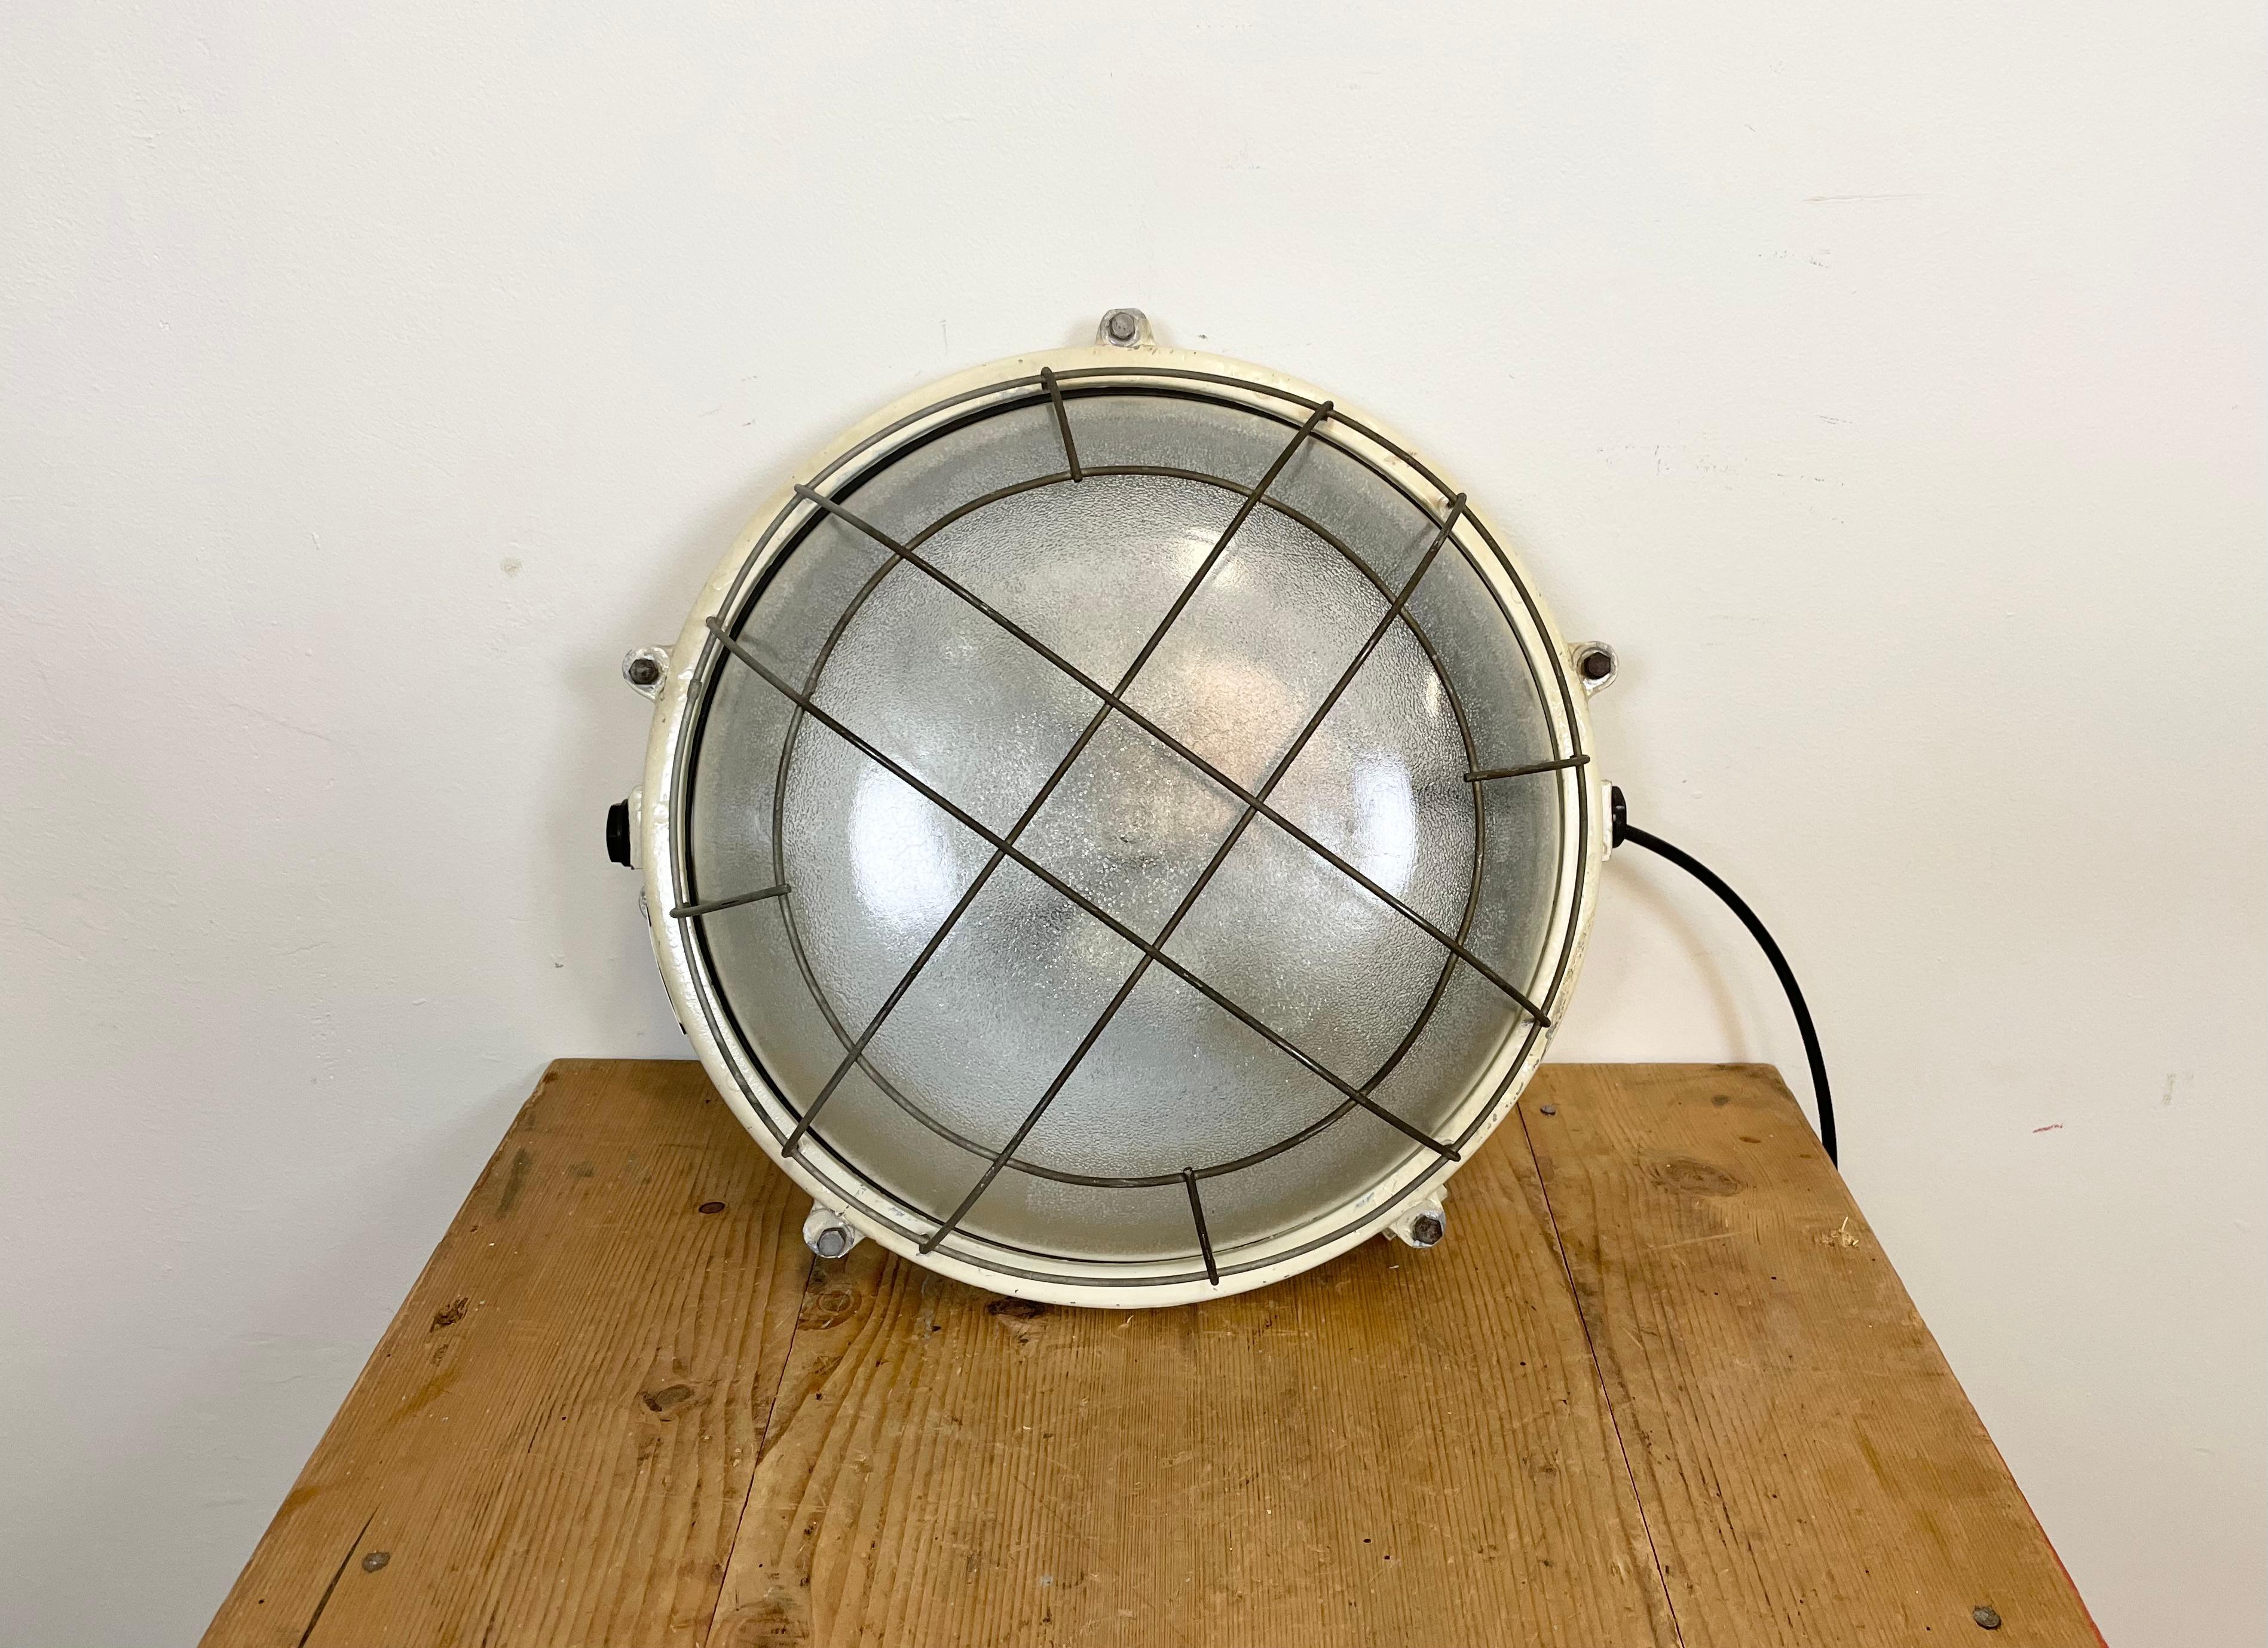 Vintage industrial cast aluminium wall lamp made by Elektrosvit in former Czechoslovakia during the 1970s. It fetures a cast aluminium body, frosted curved glass cover and iron grid. Two porcelain sockets require E 27 light bulbs. It can be also